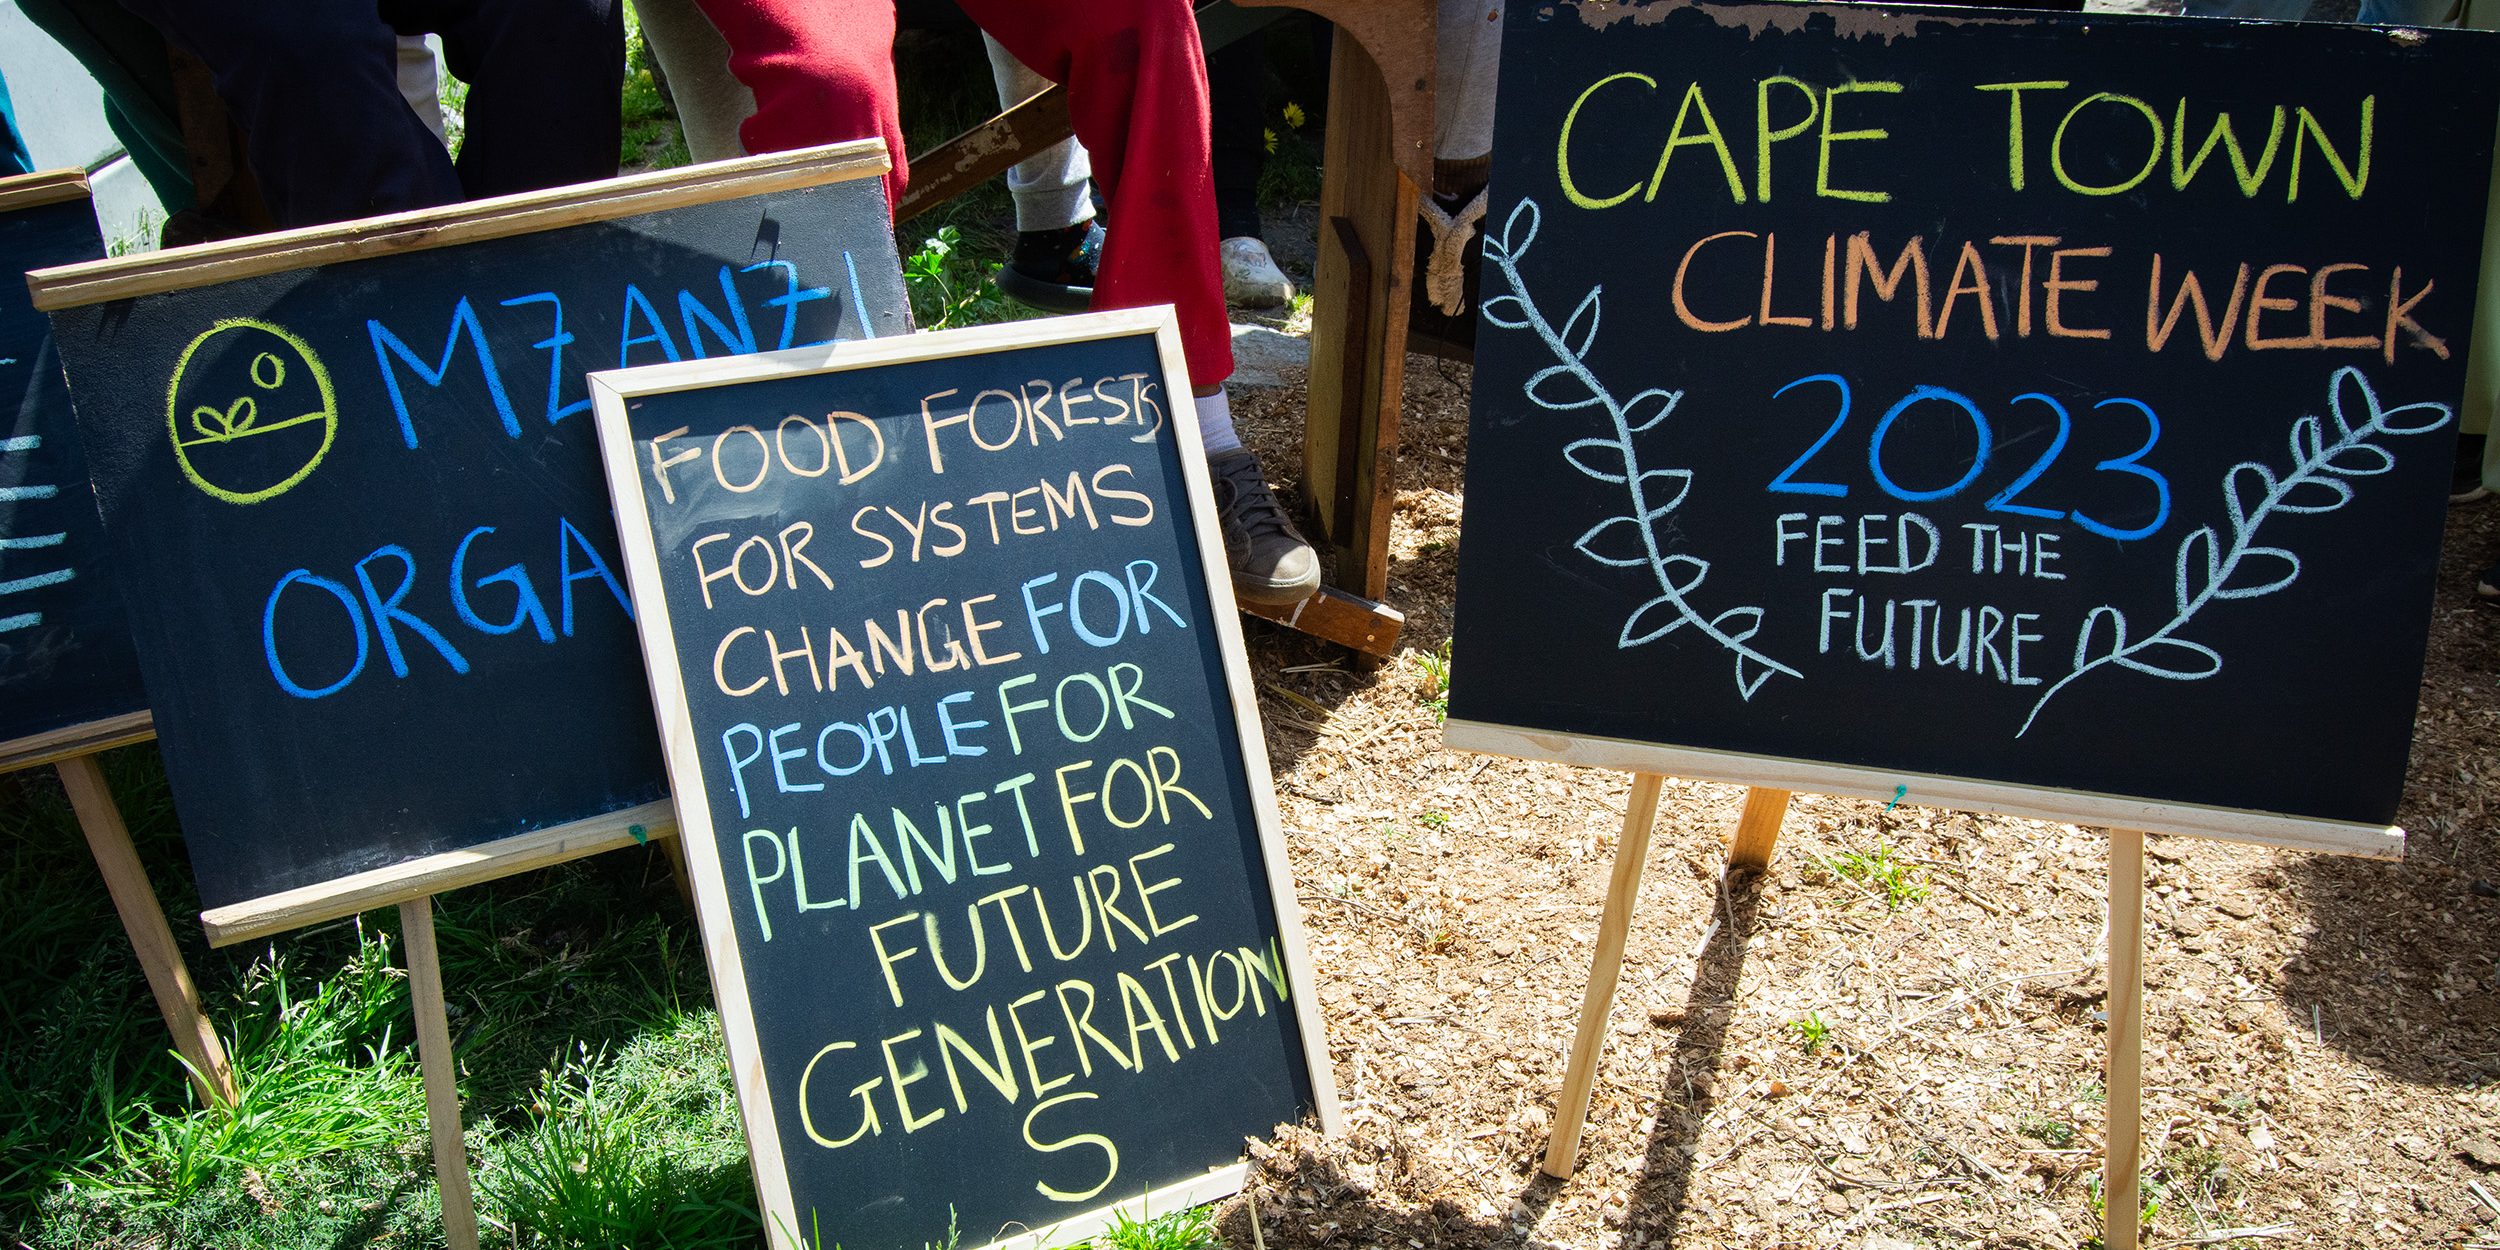 Cape Town Climate Week wrap